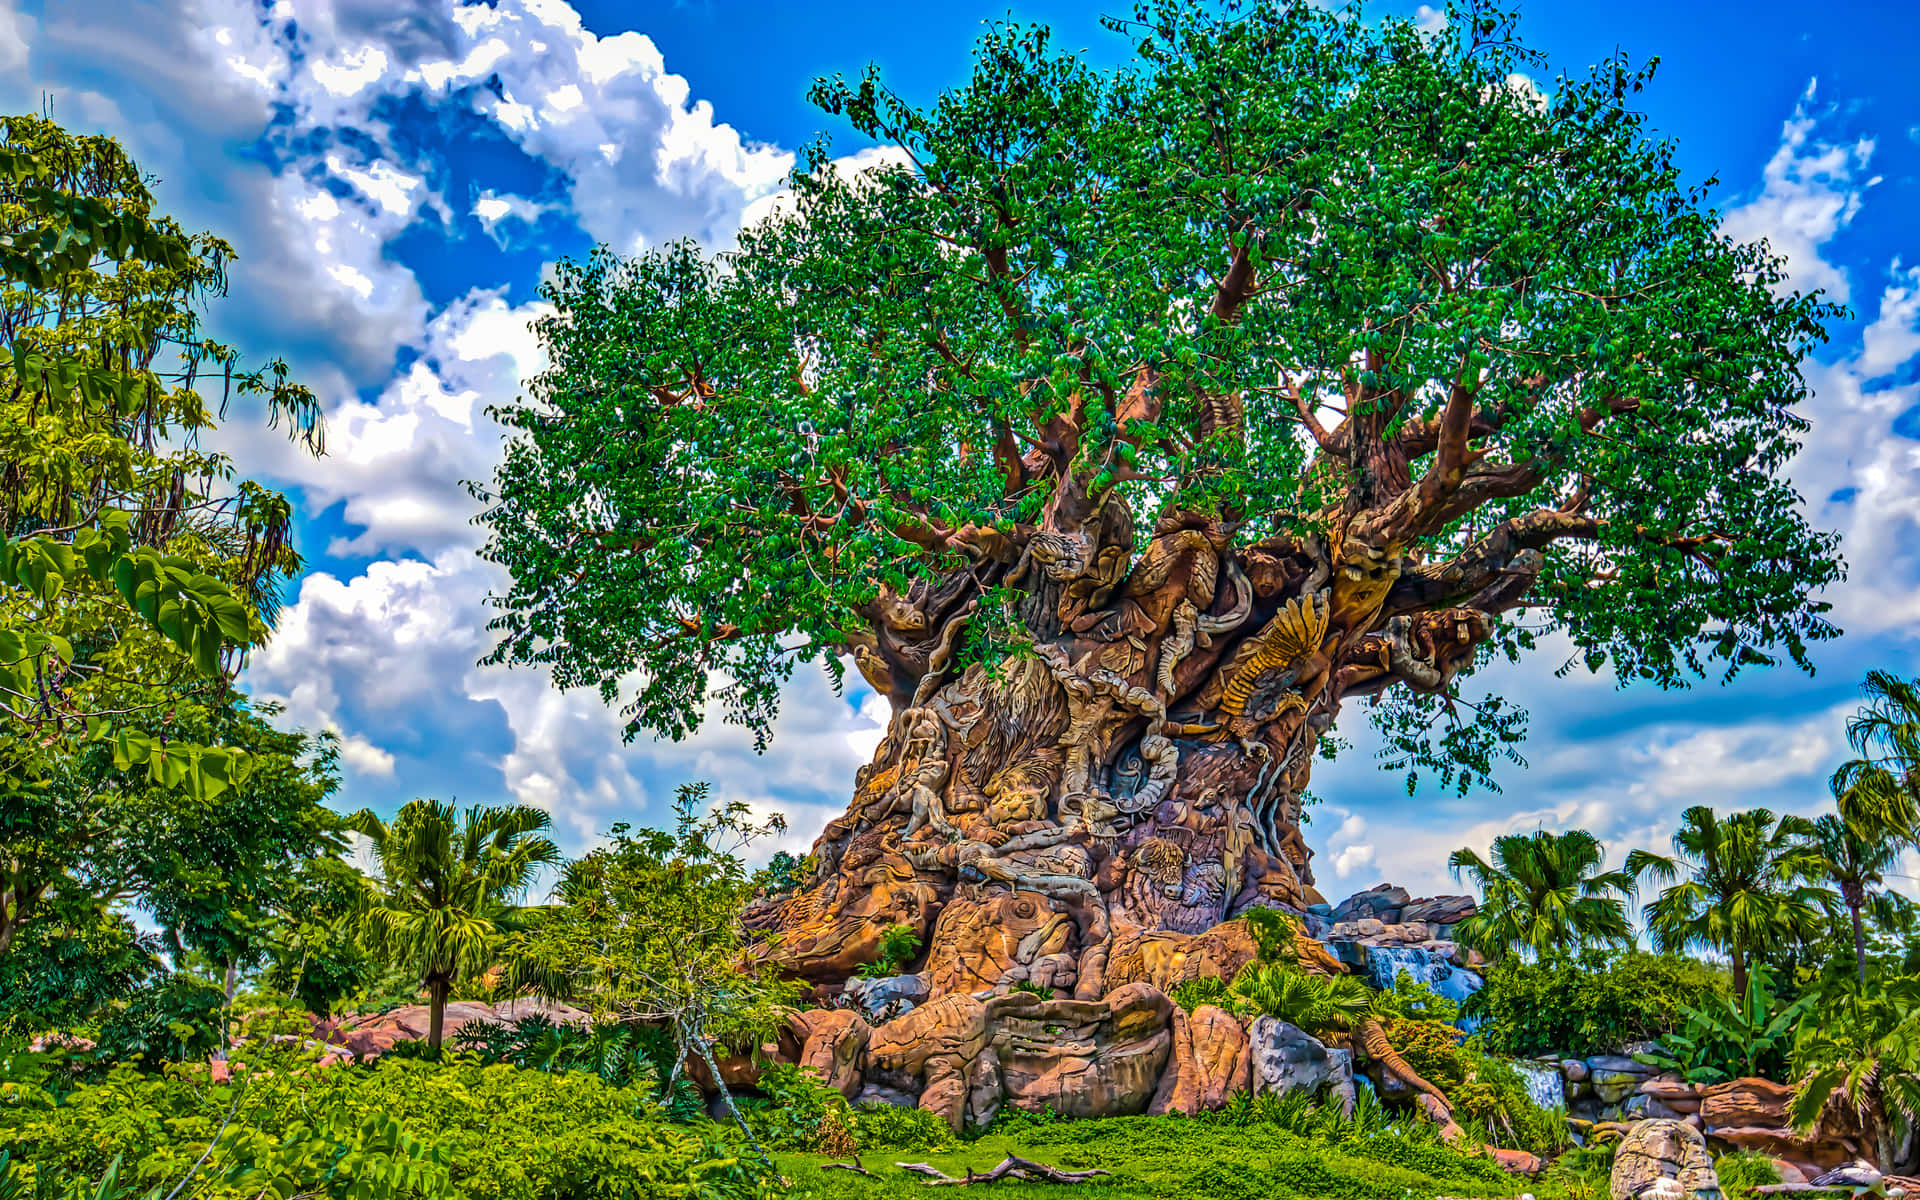 "an Ancient Tree, Symbolizing Life And Growth." Wallpaper